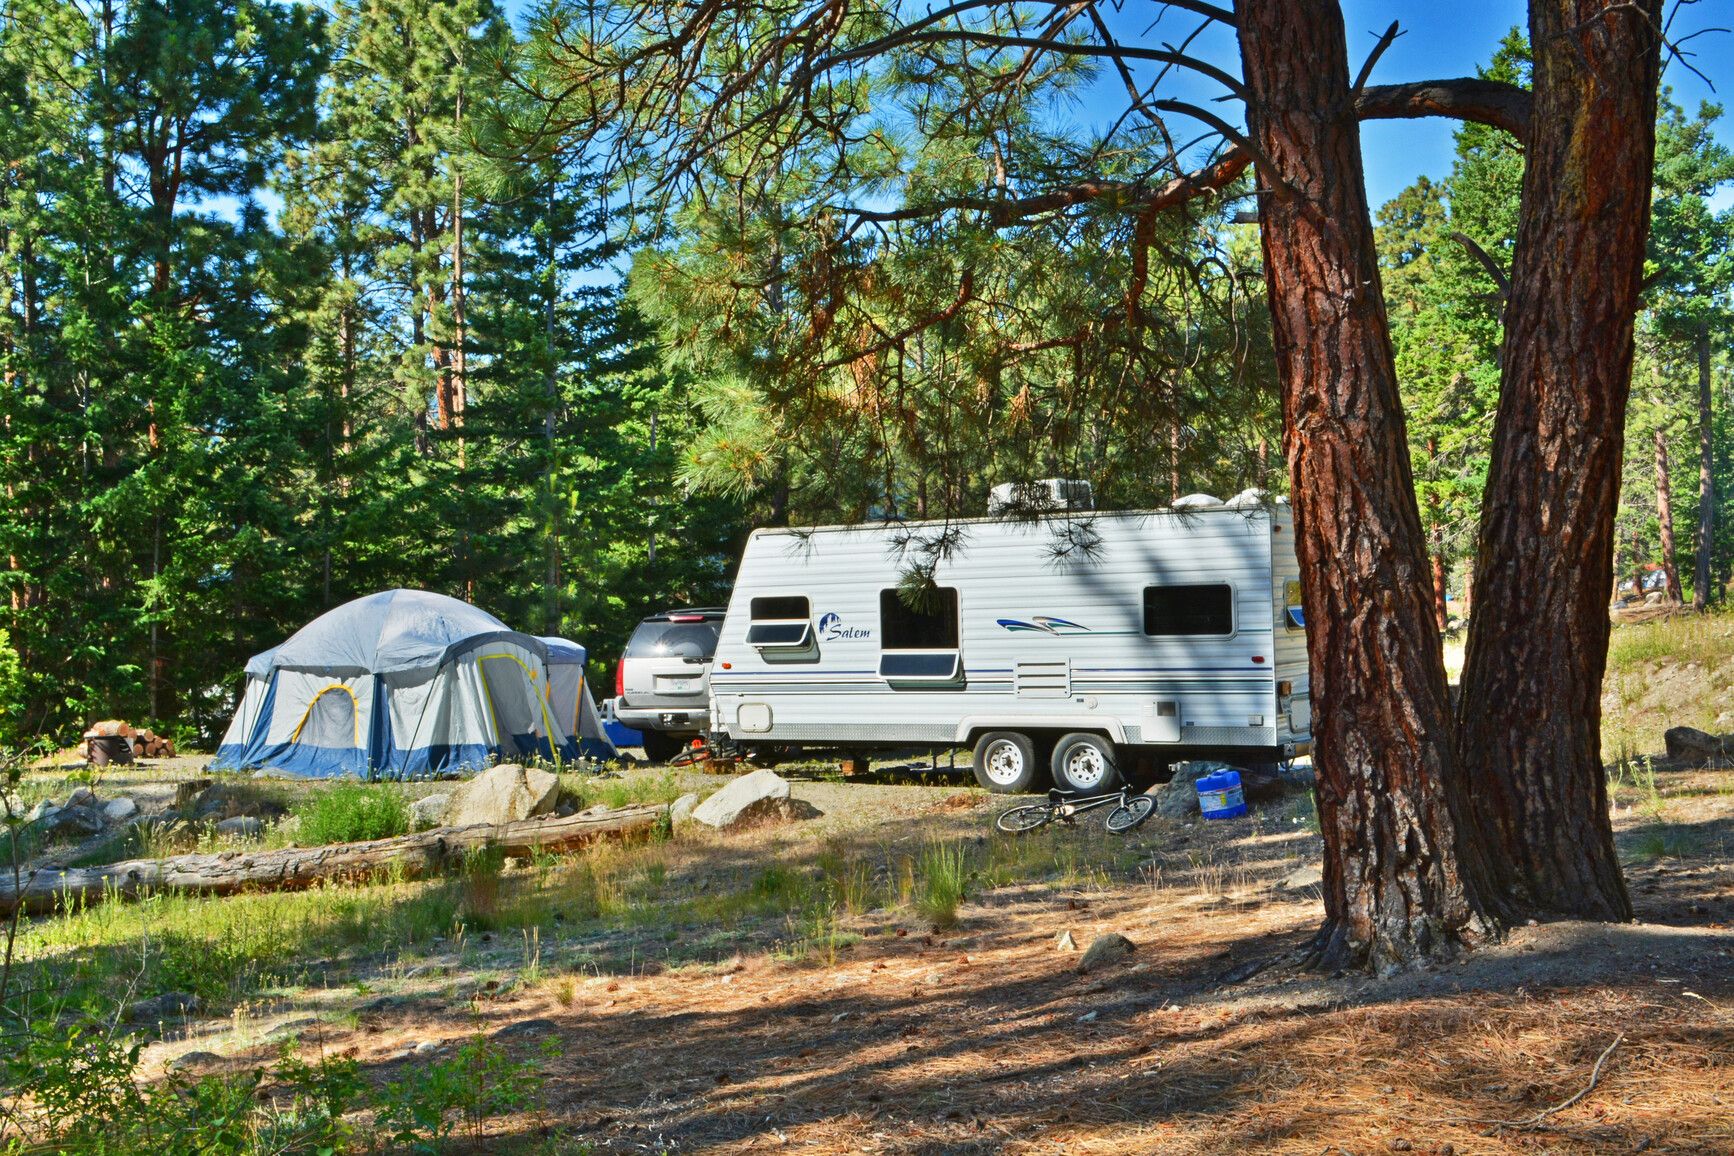 Monck Park's campsites provide the perfect spot for relaxation and adventure